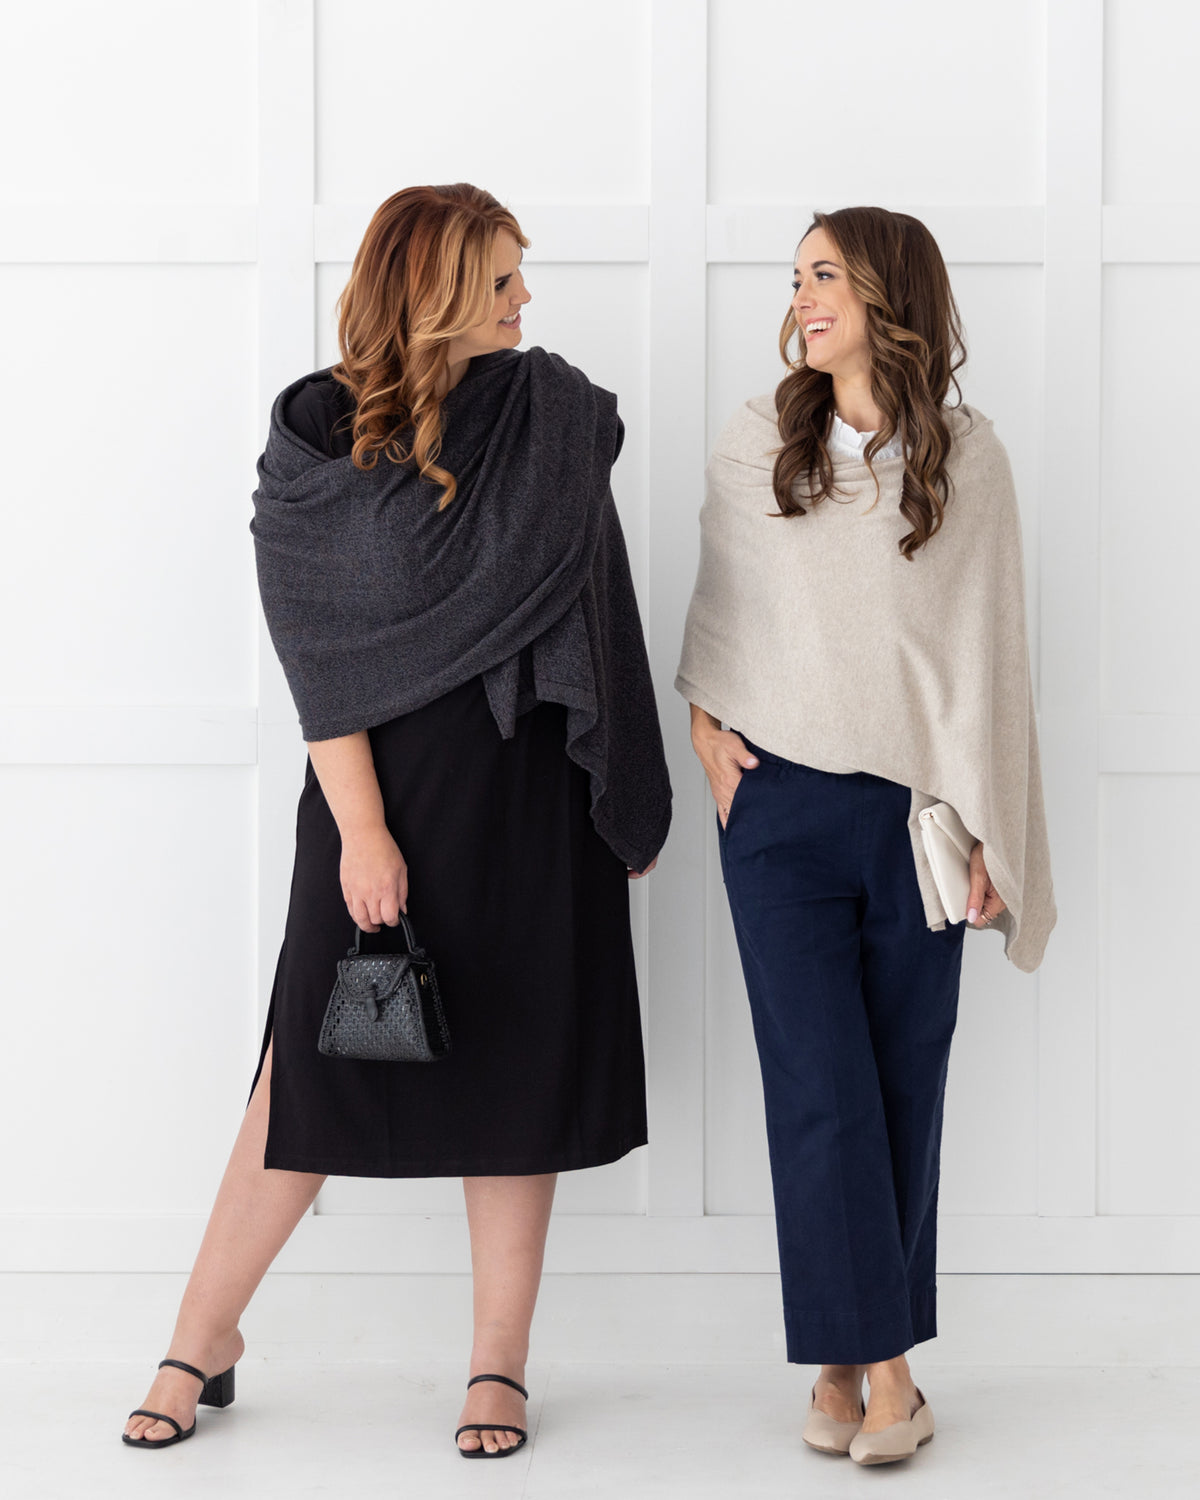 Woman wearing the Dreamsoft Travel Scarf in Graphite which is a gray scarf, worn as the wrap over her shoulder while holding a purse standing next to a woman wearing a Birch Dreamsoft Travel Scarf which is a tan scarf, looking at each other and smiling